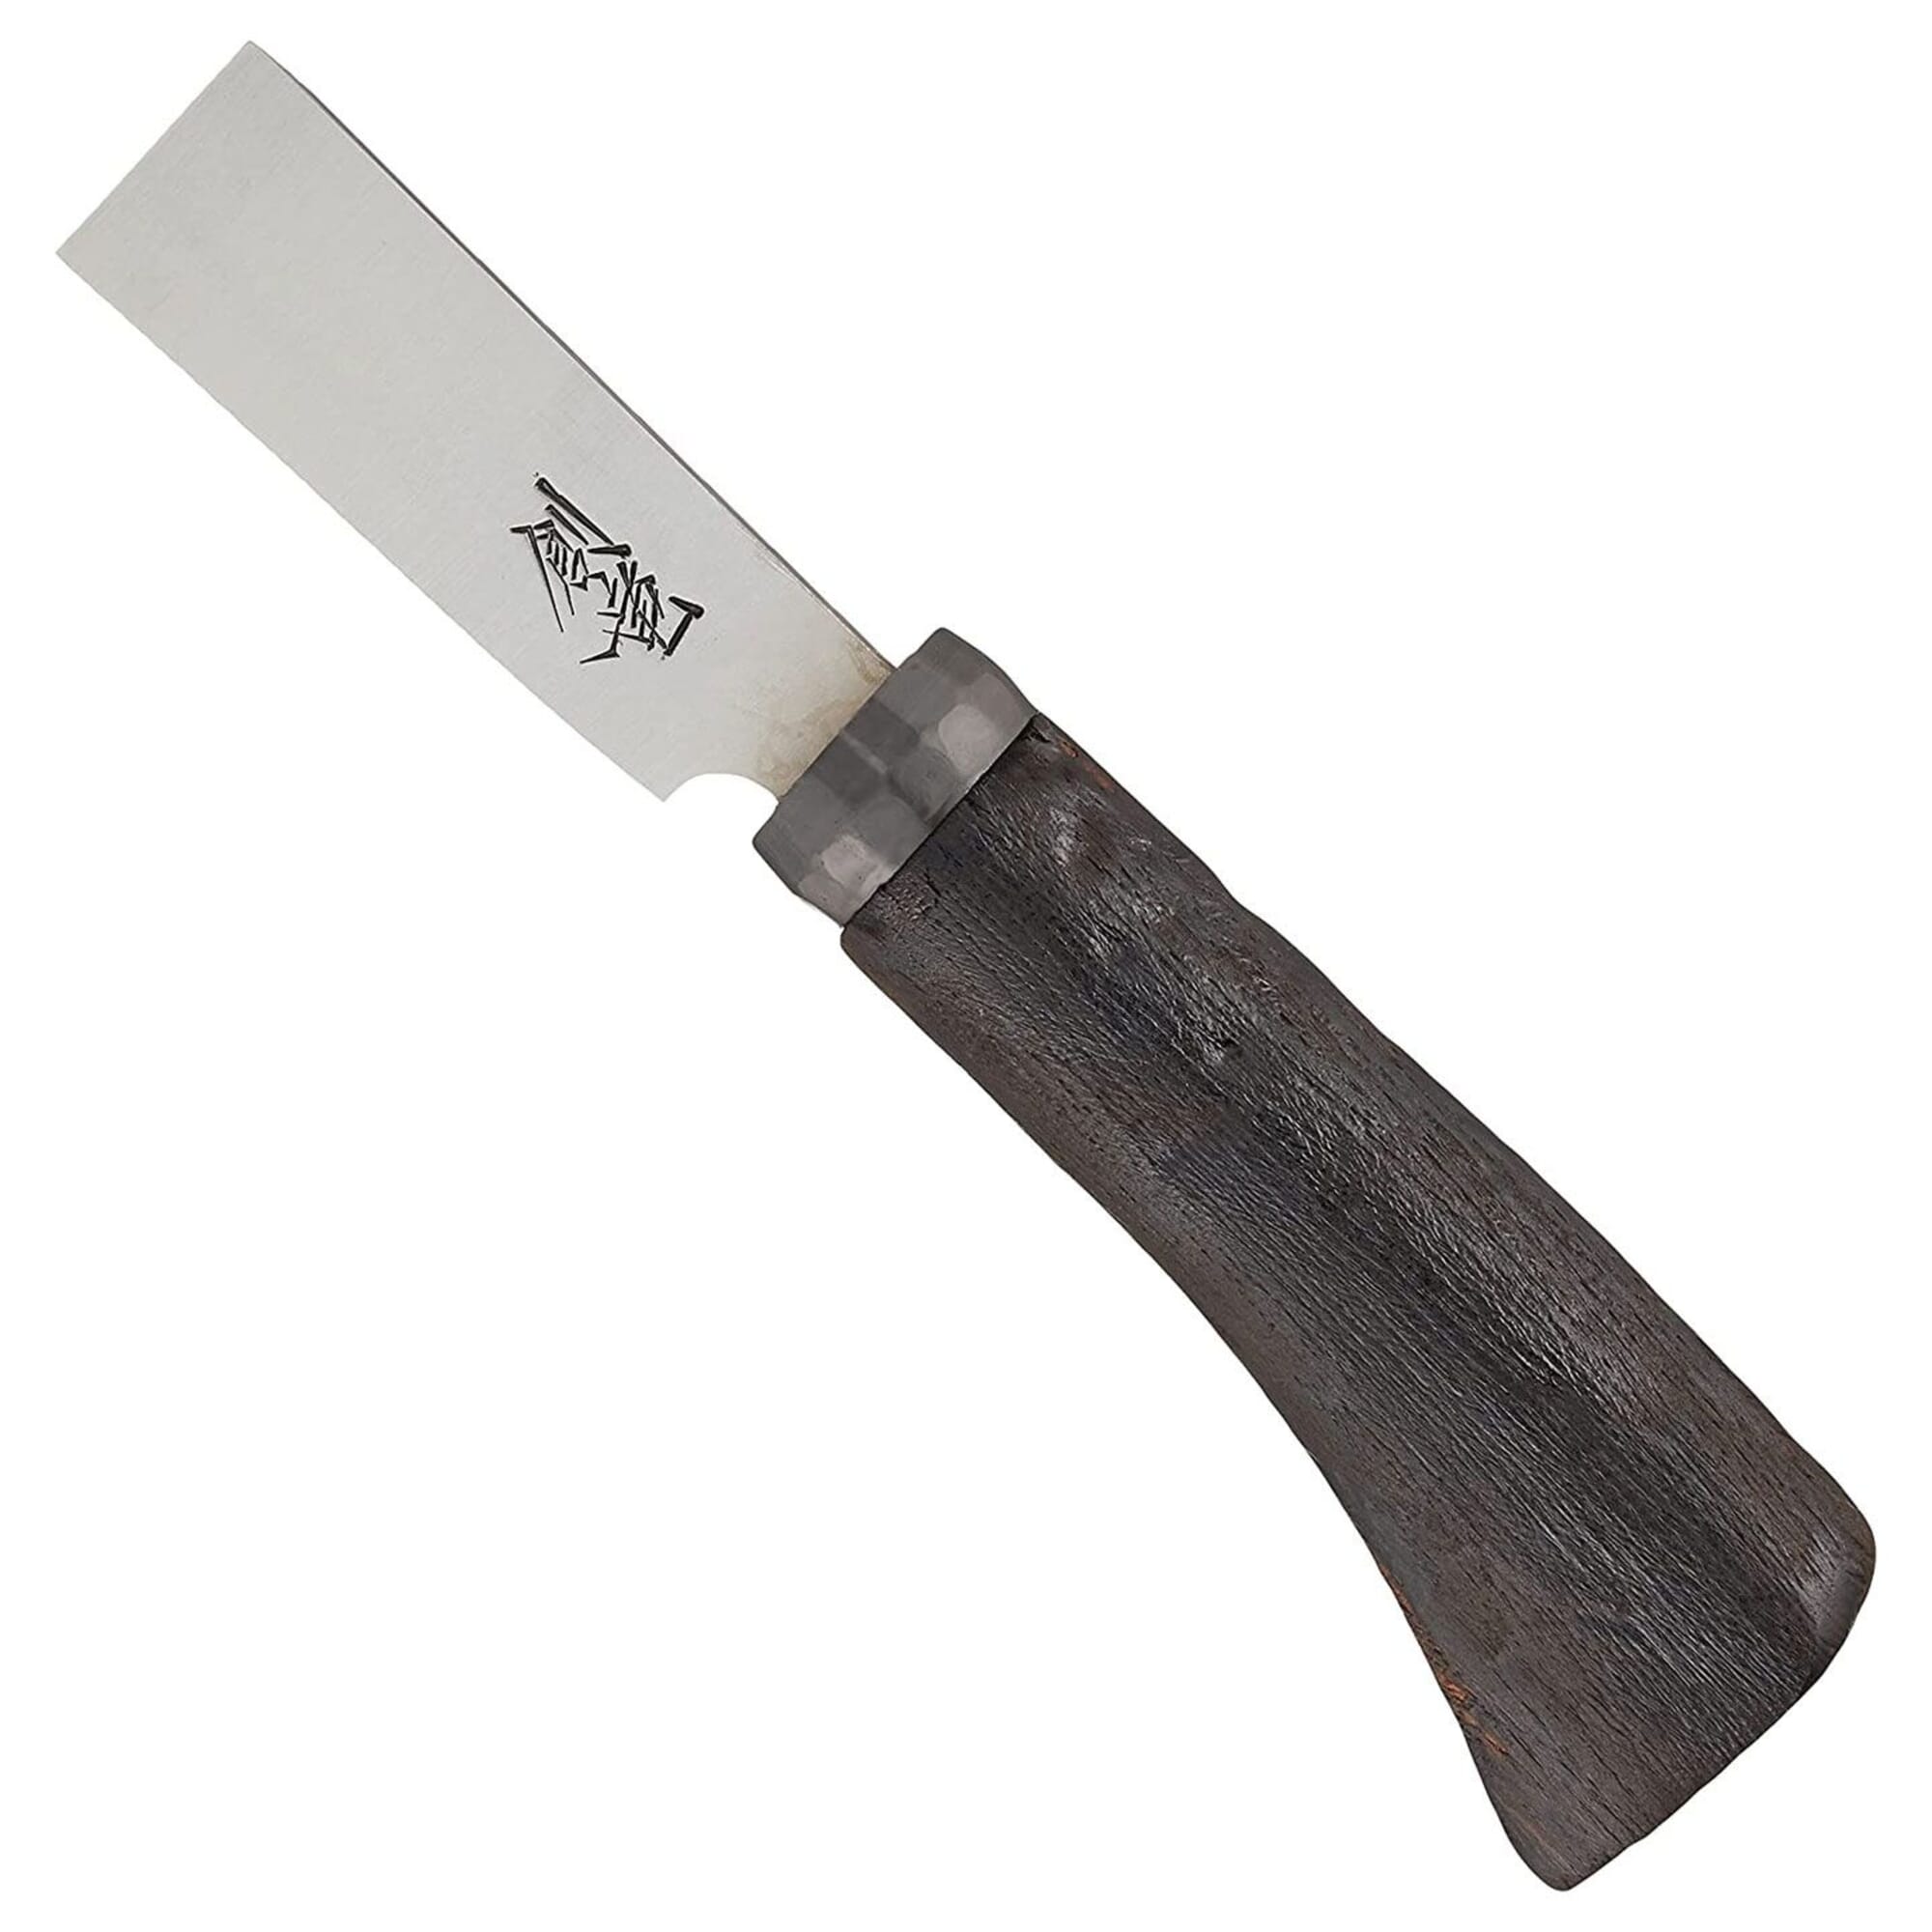 Leather Exacto Knife Blades, Leather Cutting Knifes